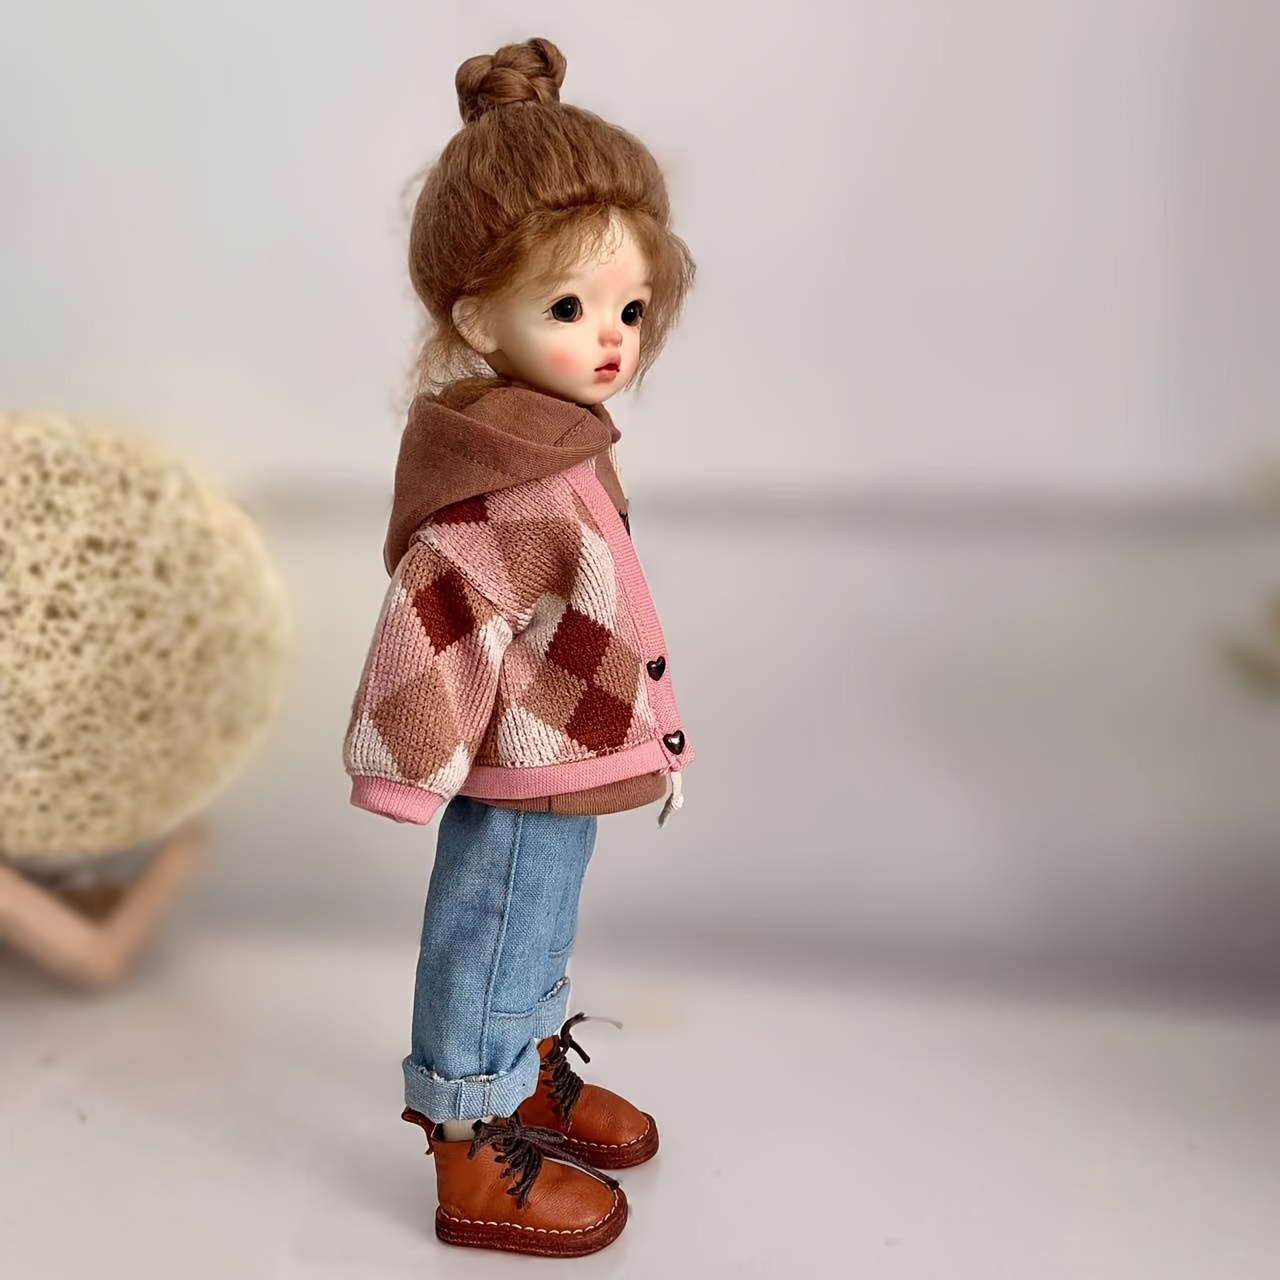 Miniature Hoodie 1/12 Female Doll Clothes For 6'' Action Figures